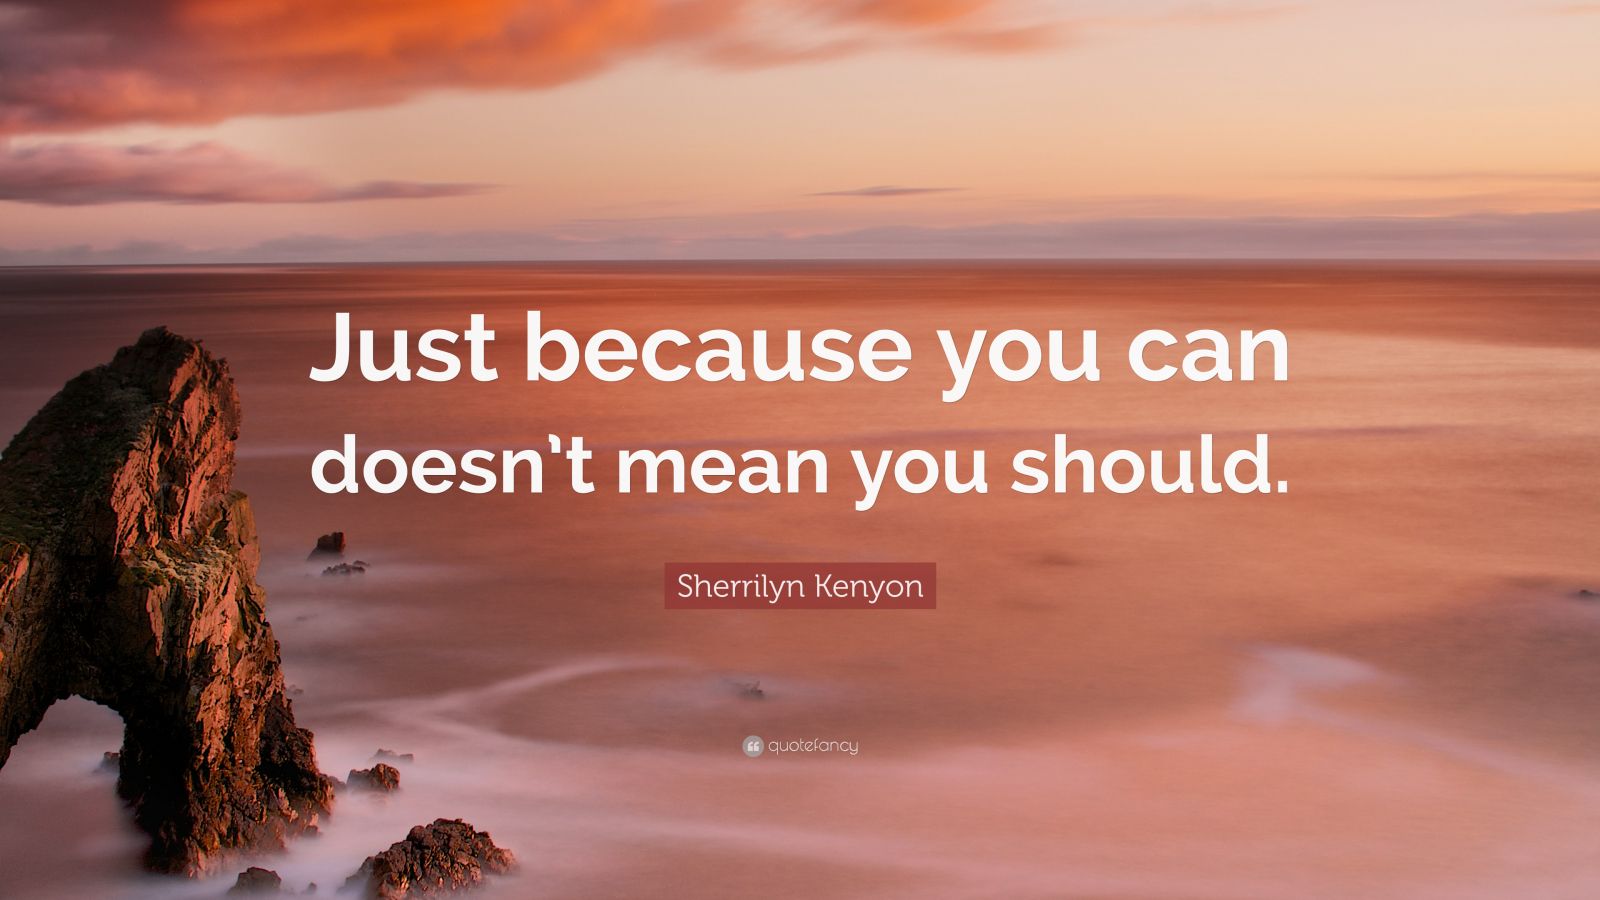 Sherrilyn Kenyon Quote “just Because You Can Doesn’t Mean You Should